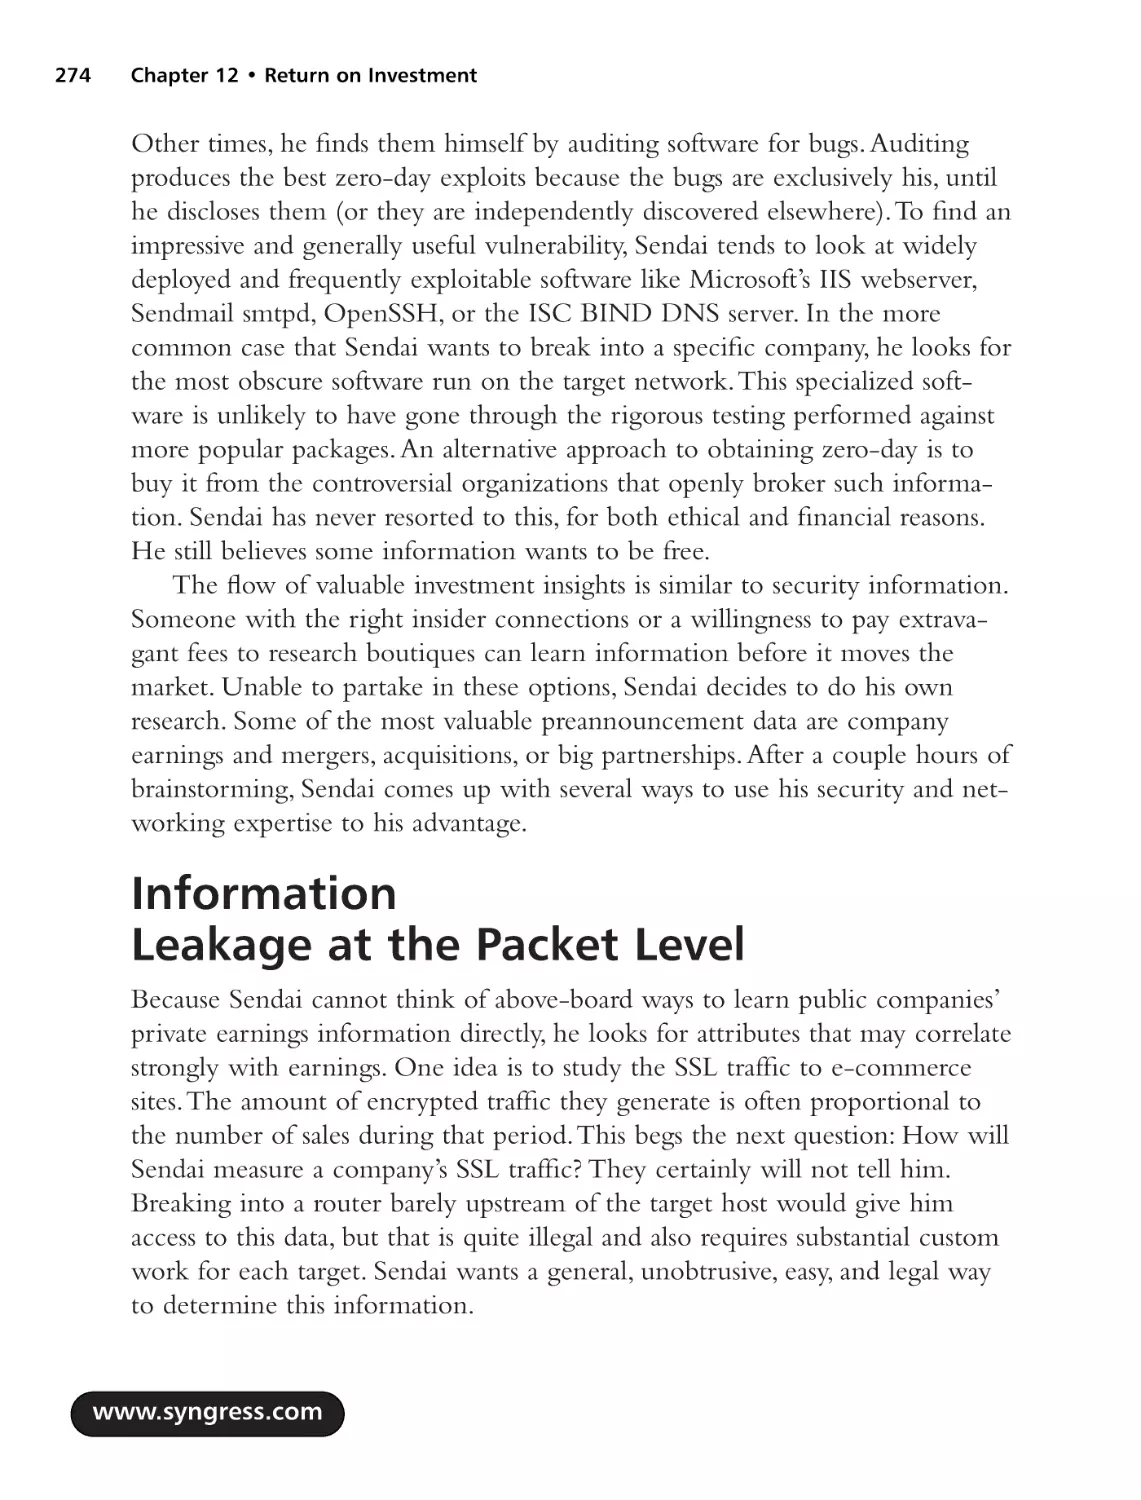 Information Leakage at the Packet Level